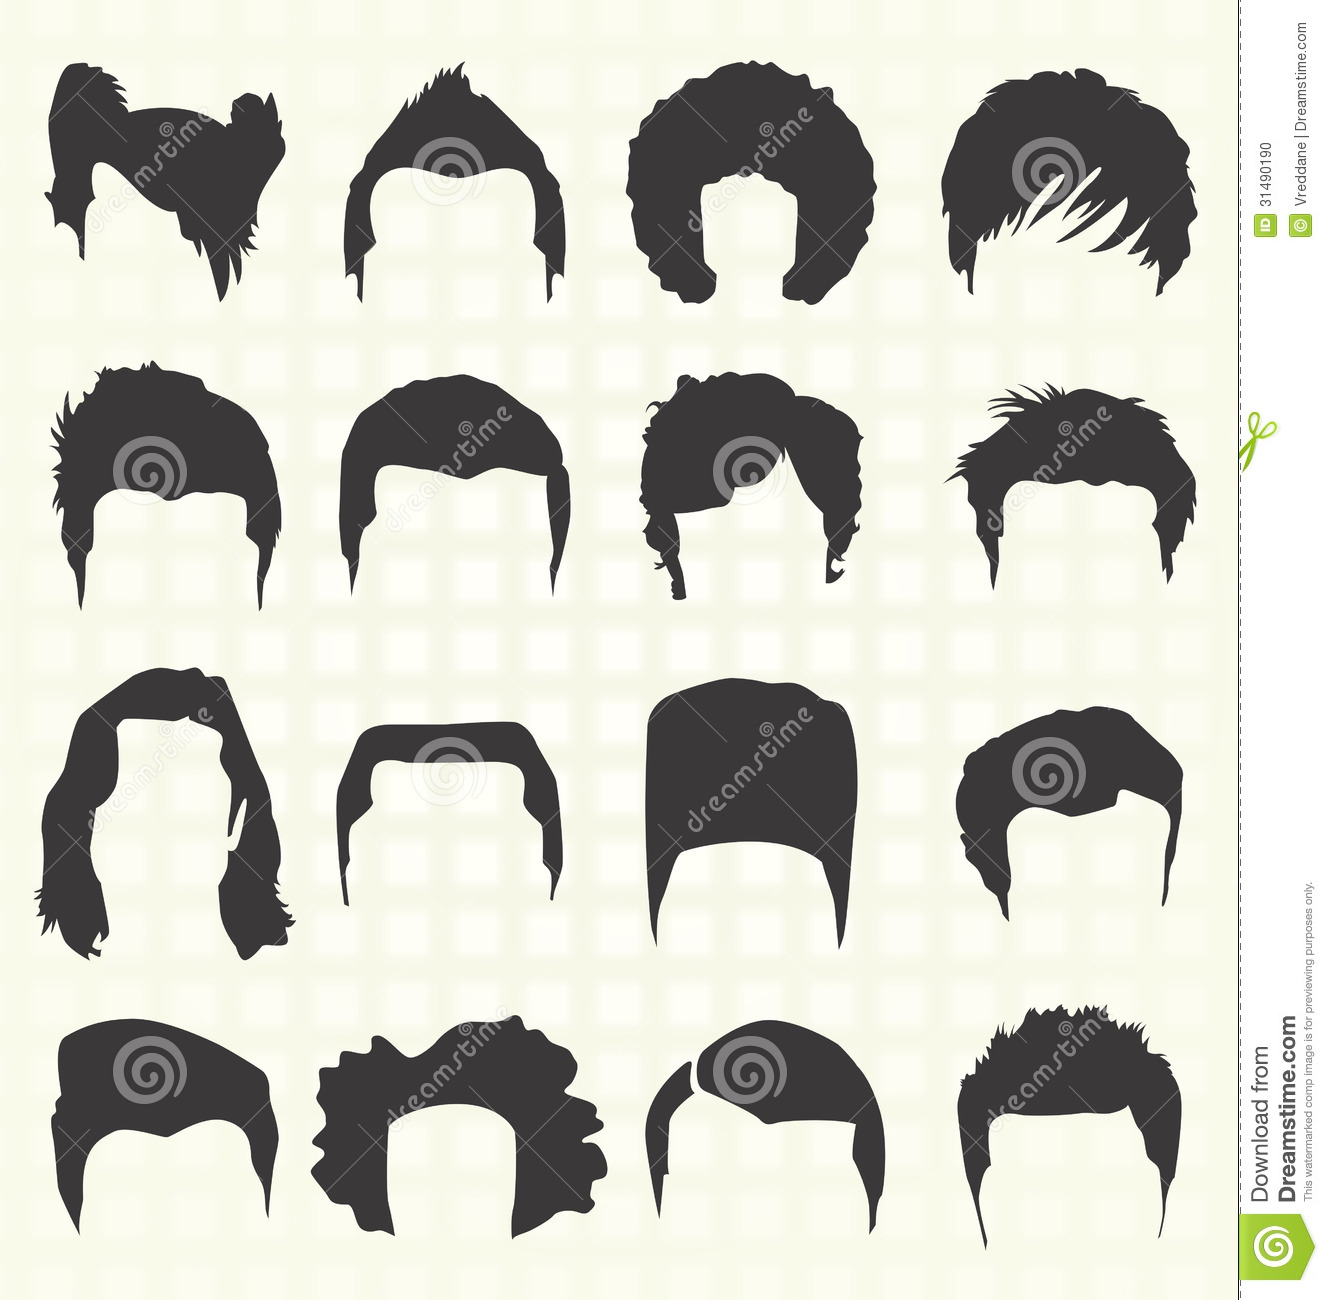 More Similar Stock Images Of   Vector Set  Hair Style Silhouettes